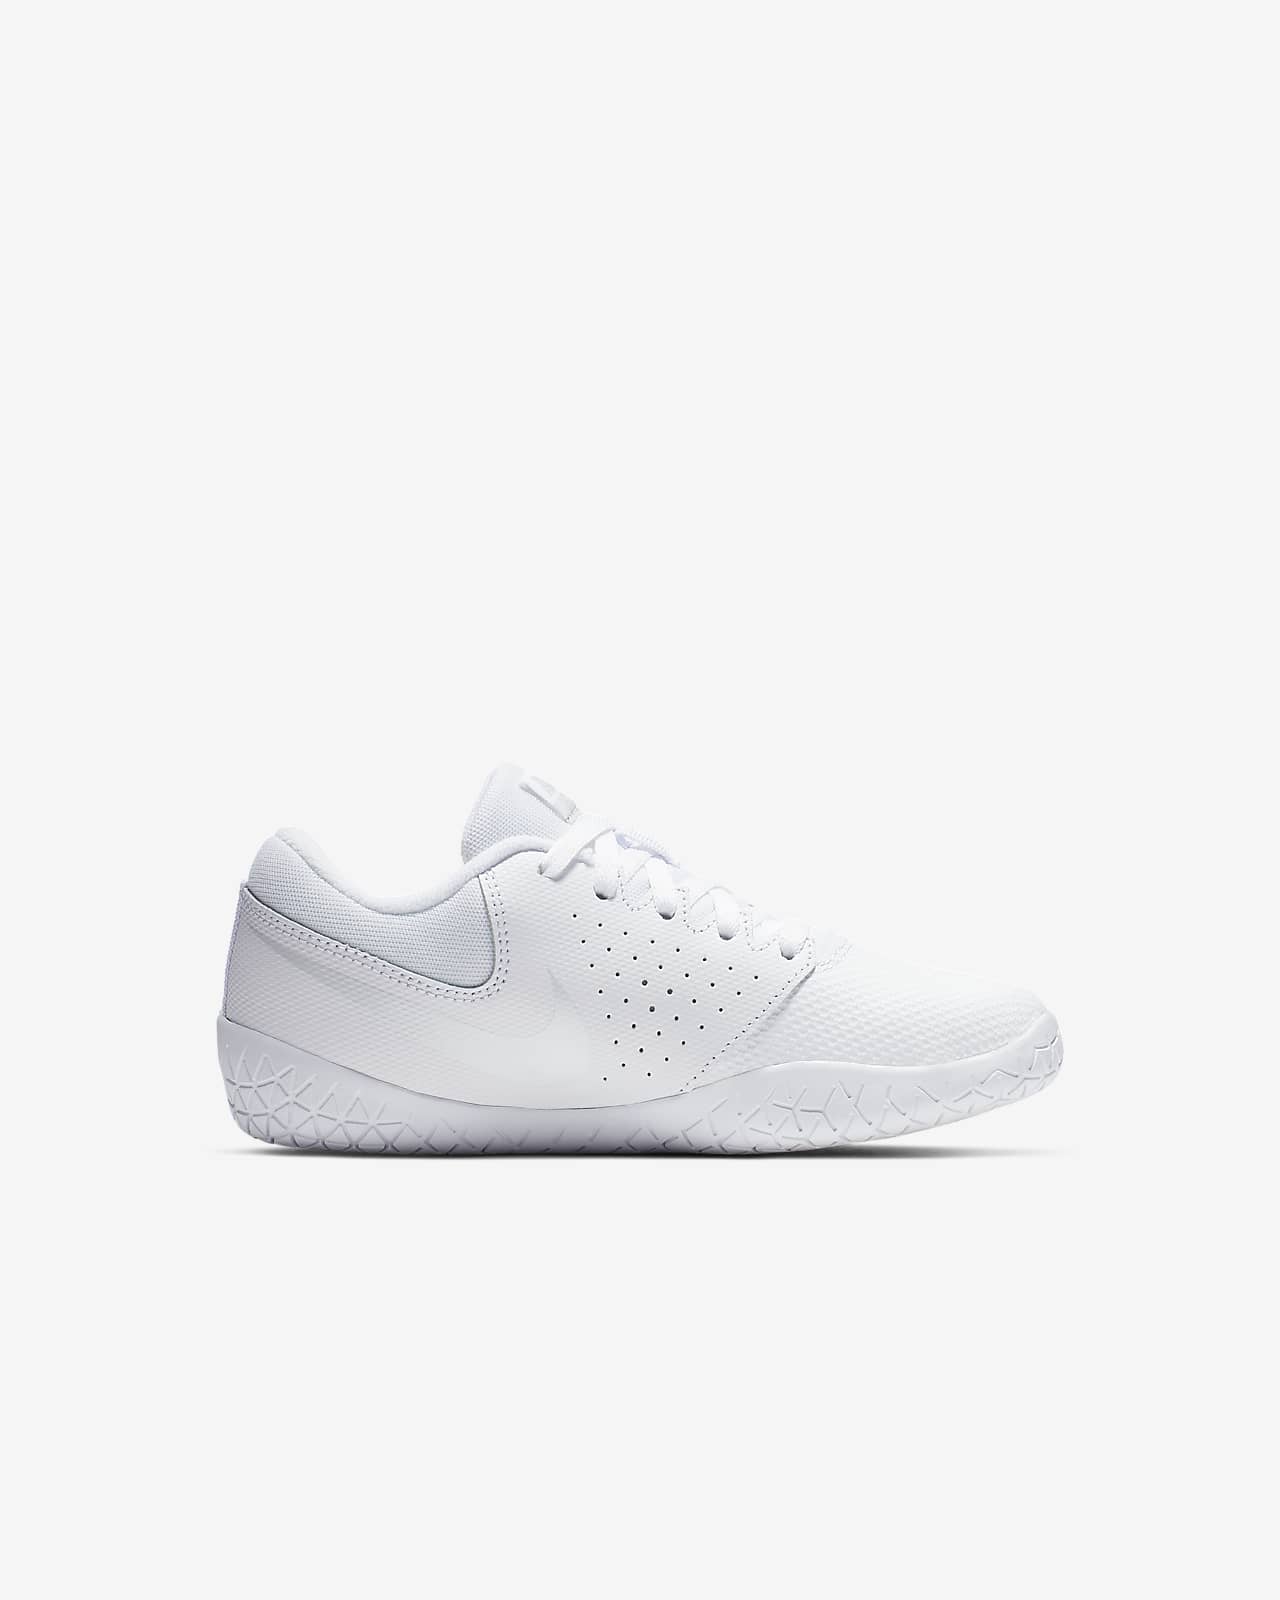 nike sideline iv cheer shoes youth